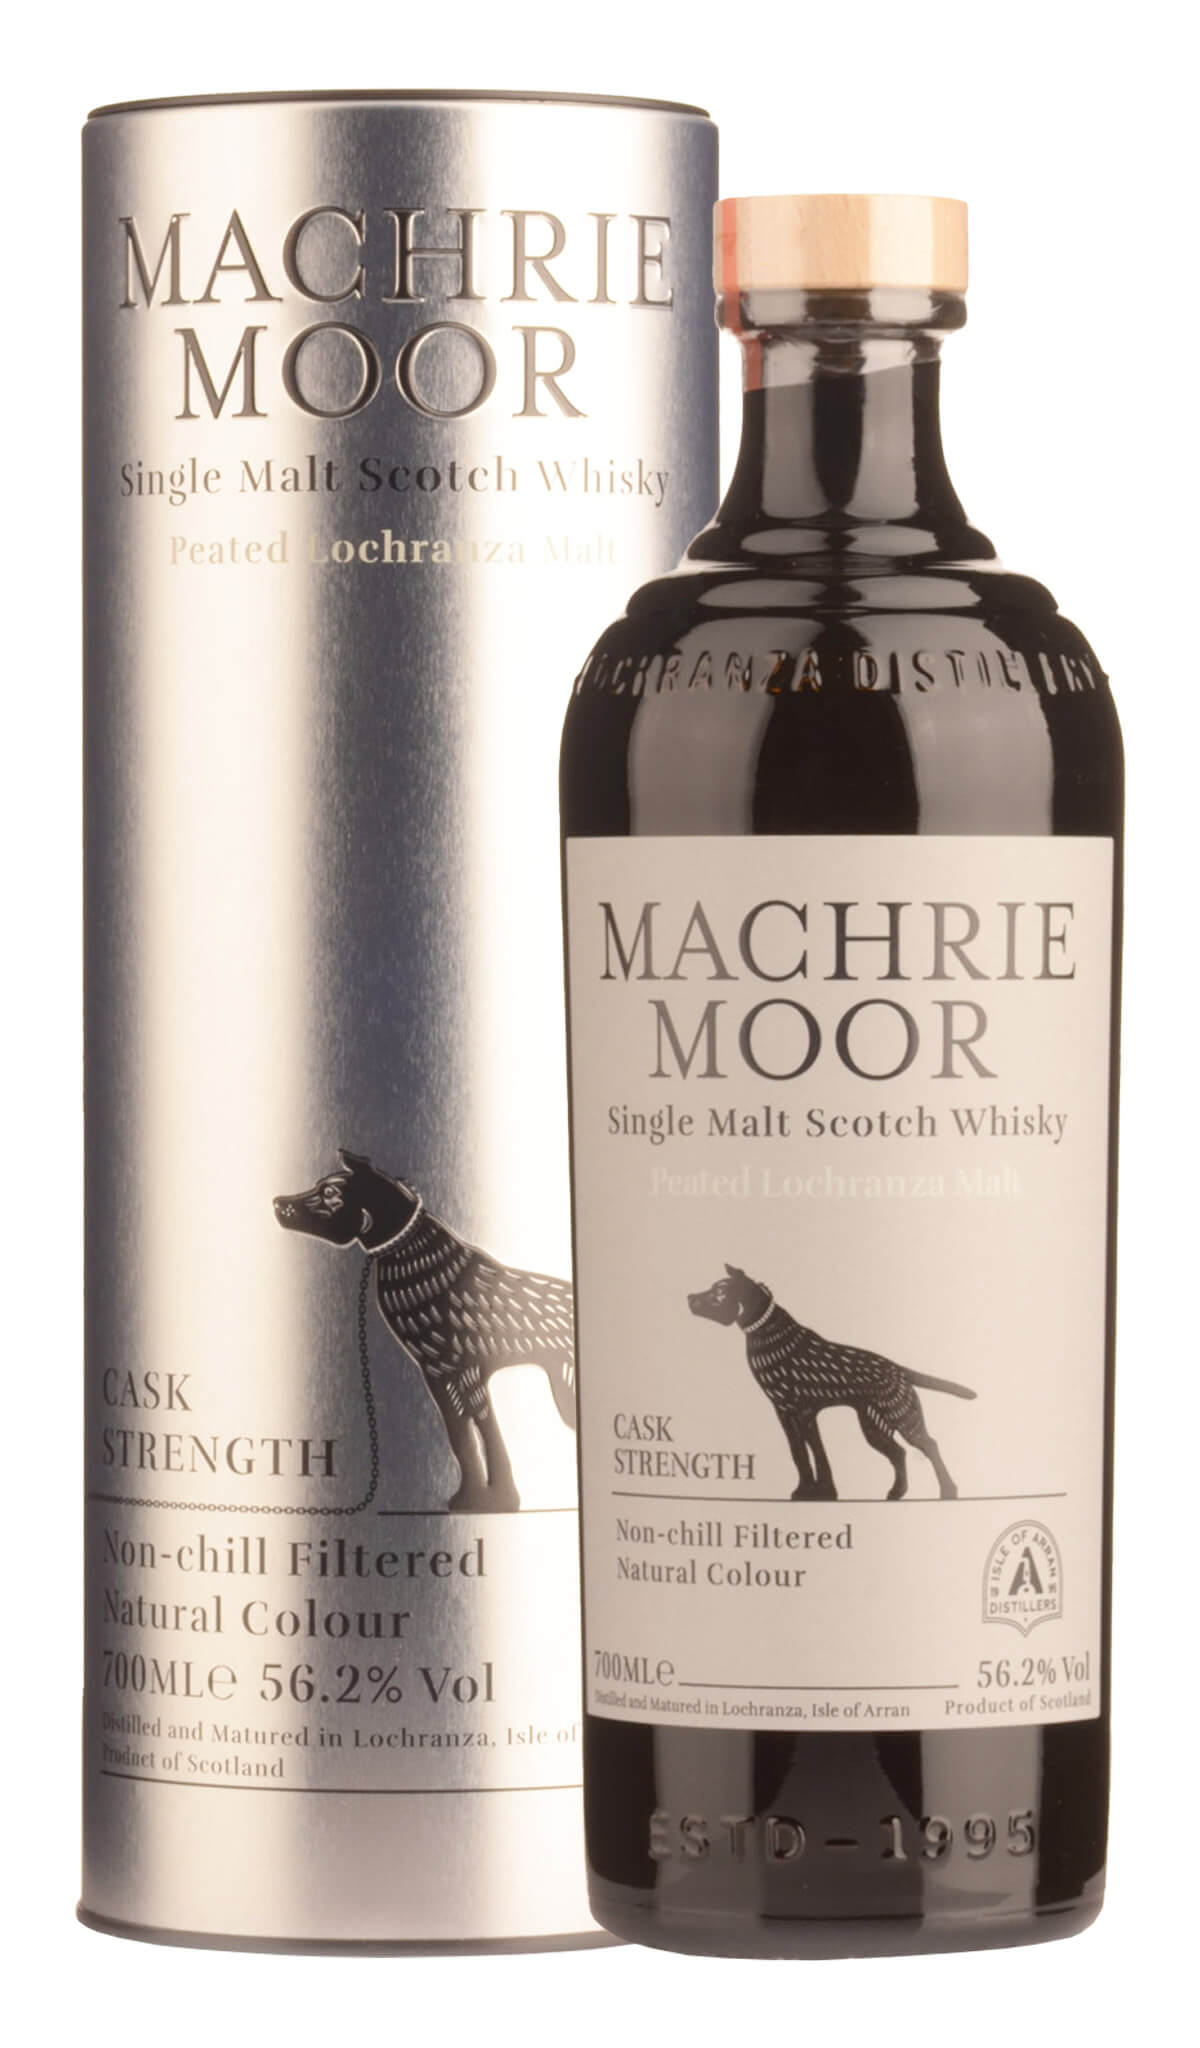 Find out more, explore the range and purchase Arran Machrie Moor Single Malt Peated Lochranza Cask Strength 700mL available online at Wine Sellers Direct - Australia's independent liquor specialists.